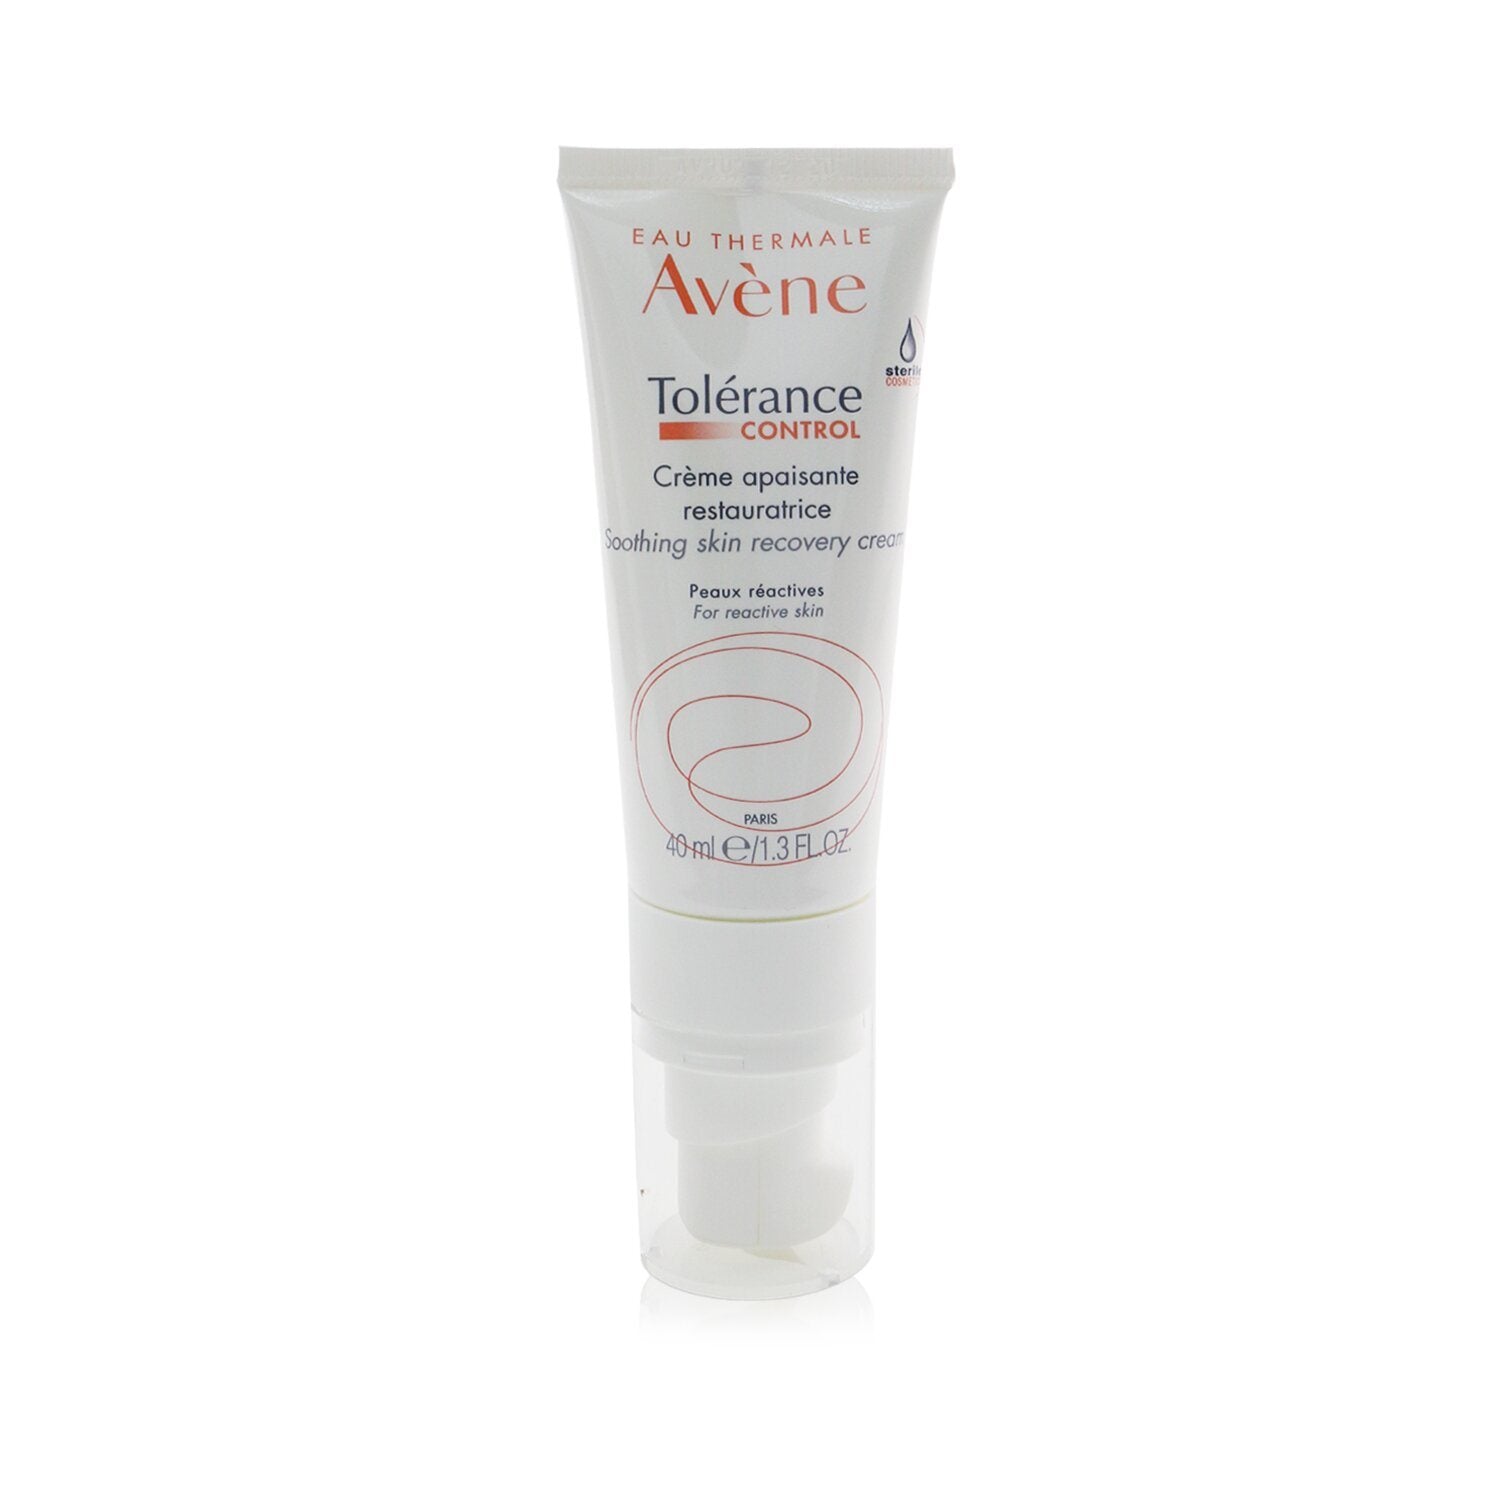 AVENE - Tolerance CONTROL Soothing Skin Recovery Cream - For Reactive Skin 13880 40ml/1.3oz is a restorative cream for reactive skin with 24 hours of continuous hydration.